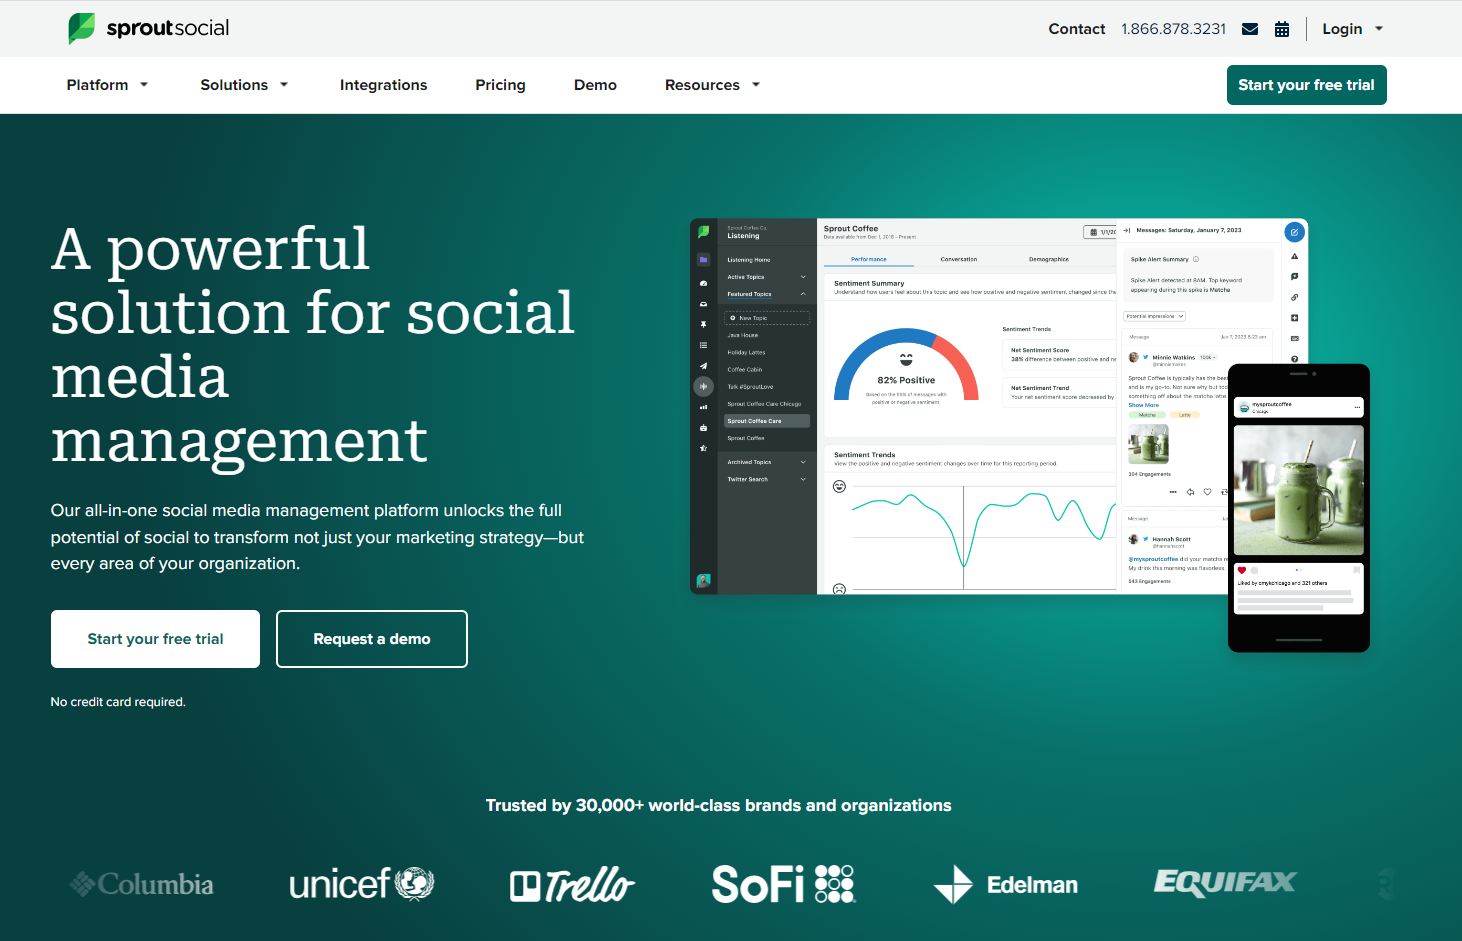 The homepage for Sprout Social's social media platform. 